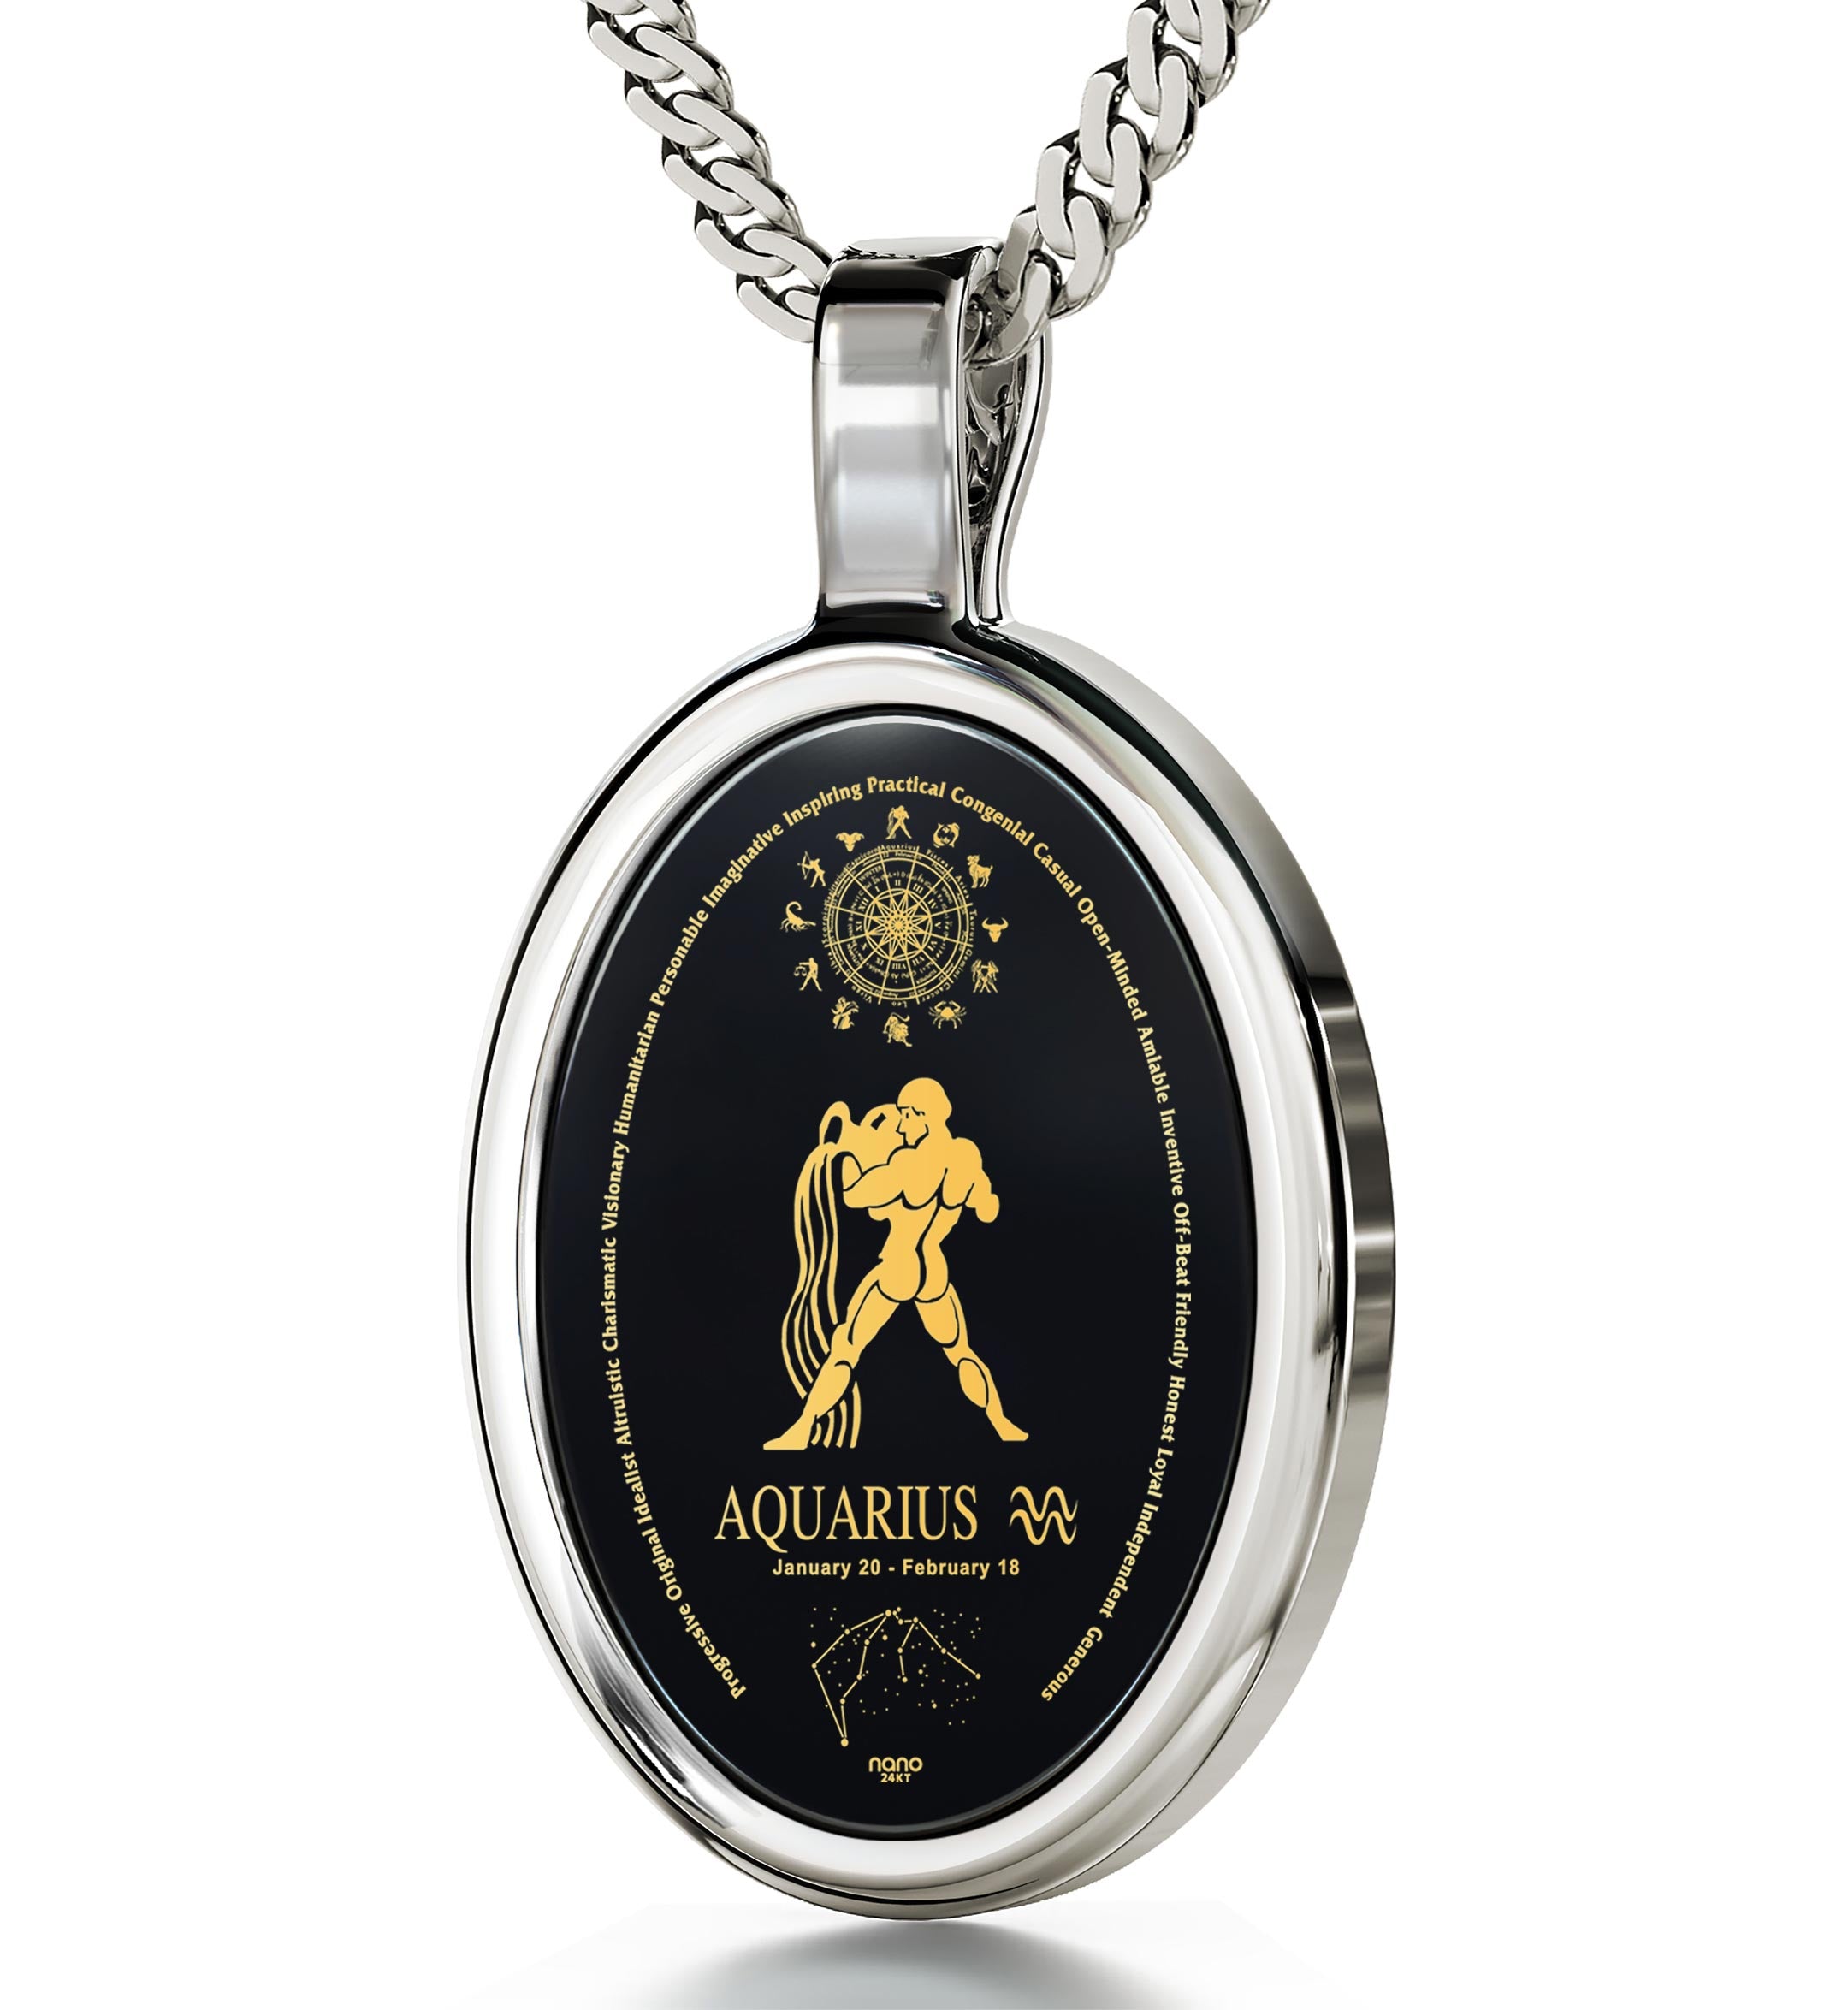 World\'s Only | Gold Necklace Jewelry Aquarius - NanoStyle Inscribed Zodiac Gift Unique 24k